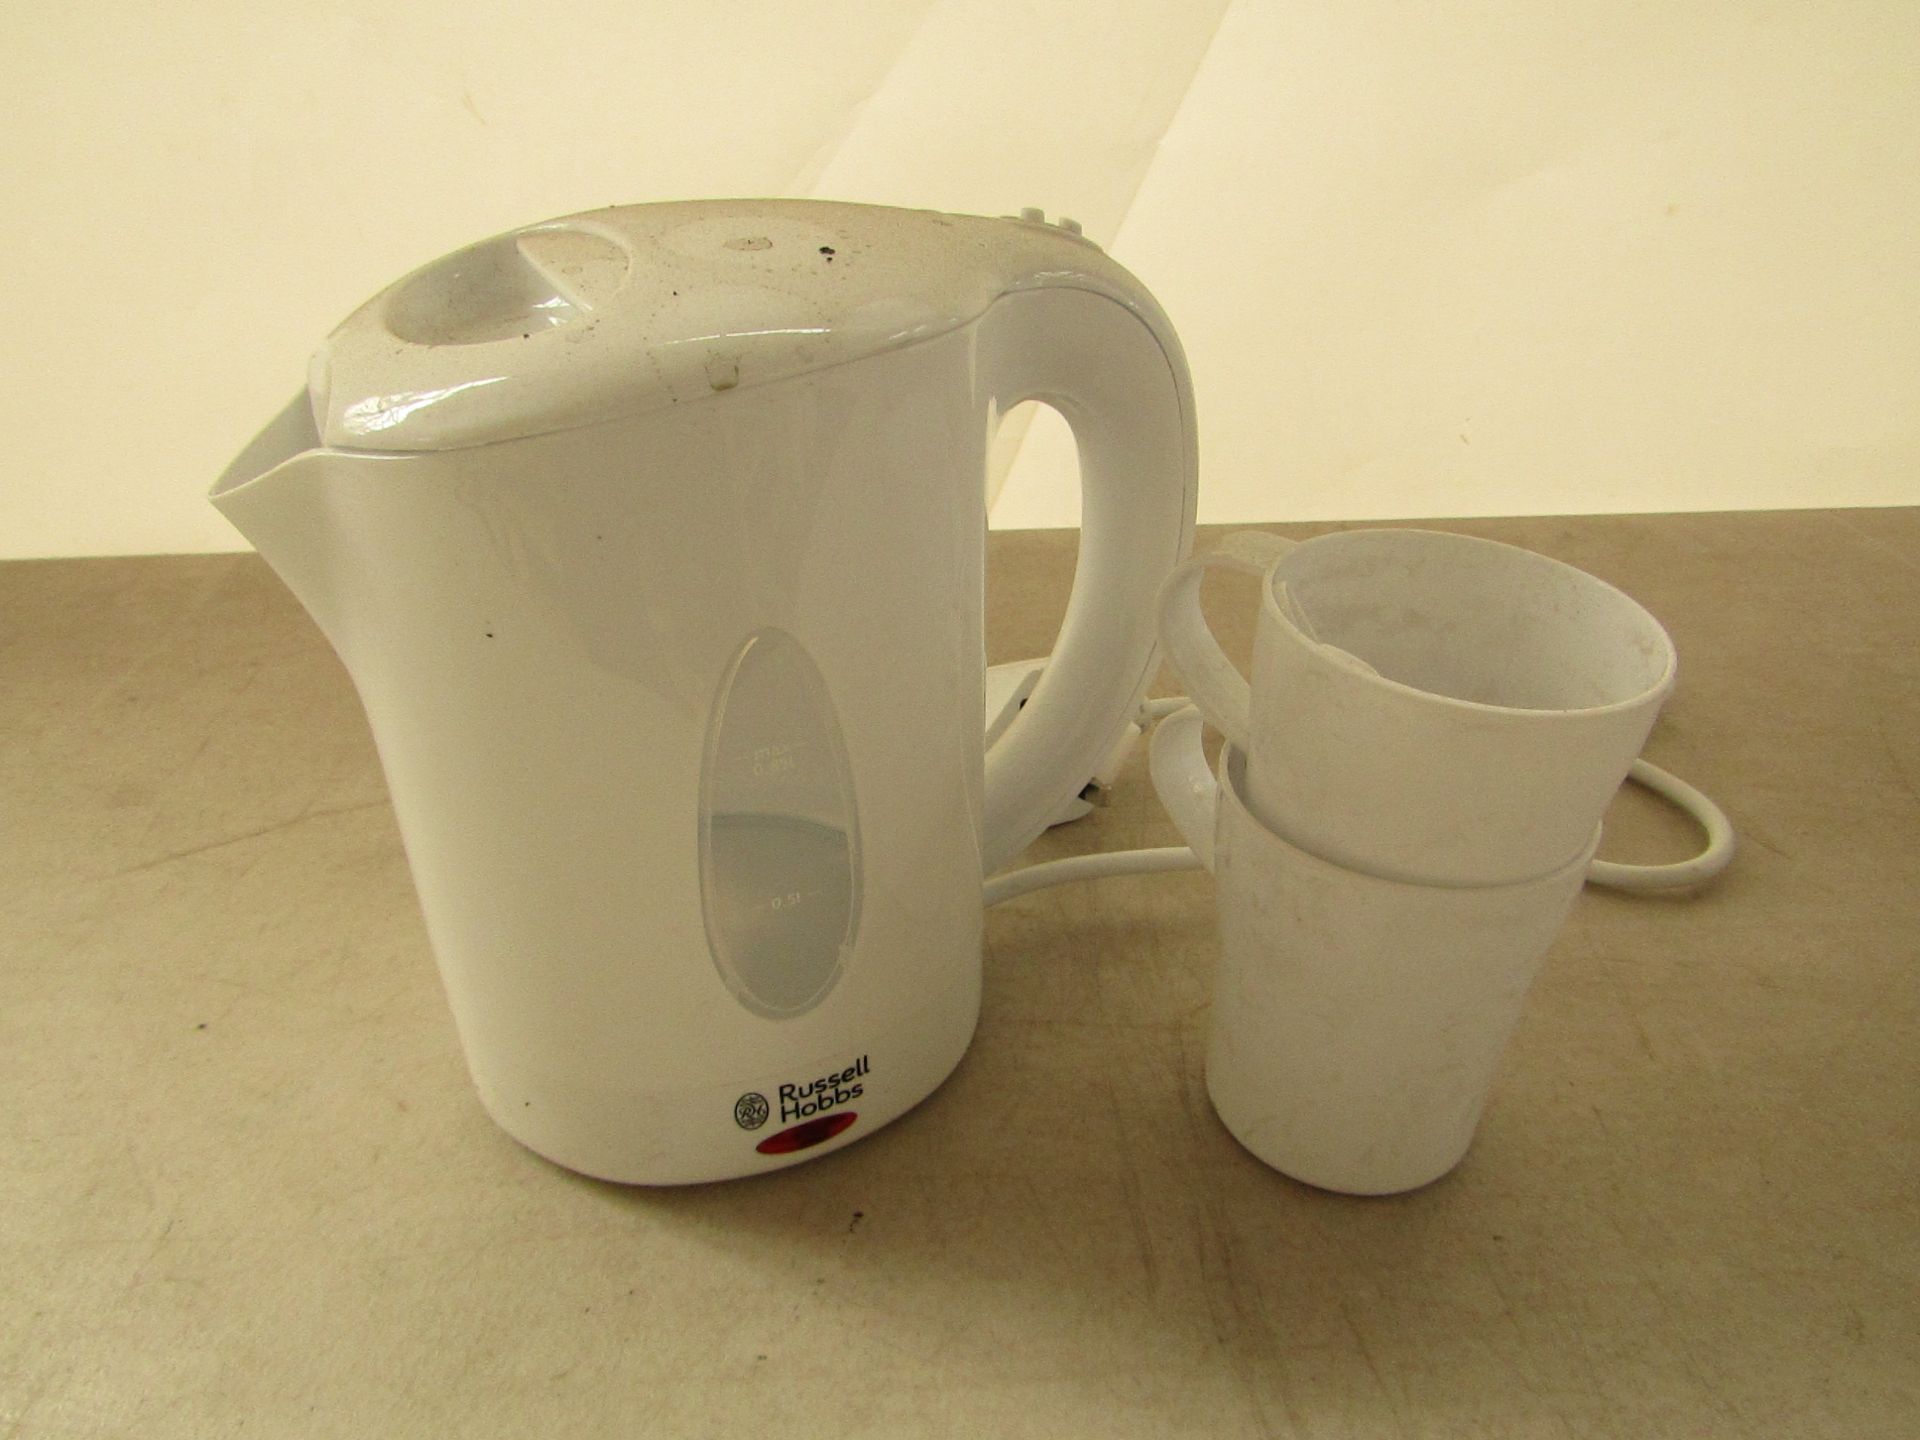 Russell Hobbs Classic Travel Kettle set includes a Mains Powered kettle, 2 mugs and 2 spoons, boxed.